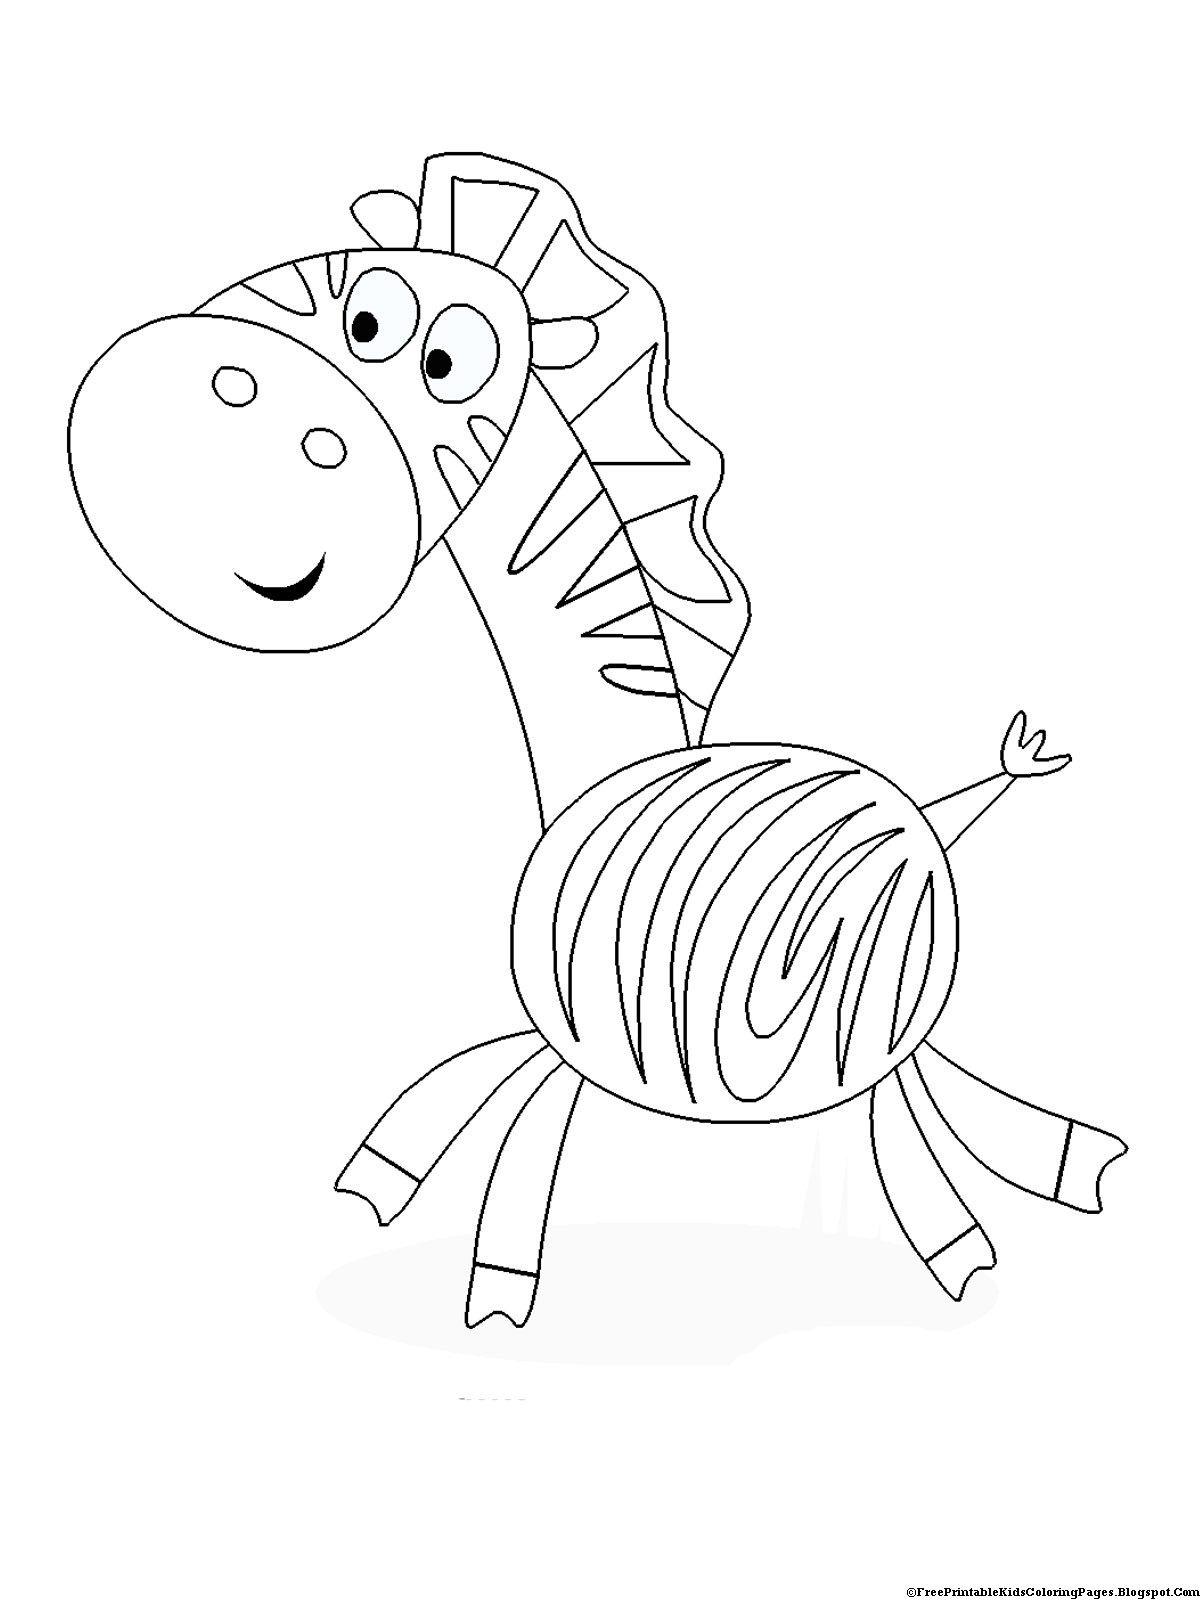 Coloring Sheet For Kids
 Zebra Coloring Pages